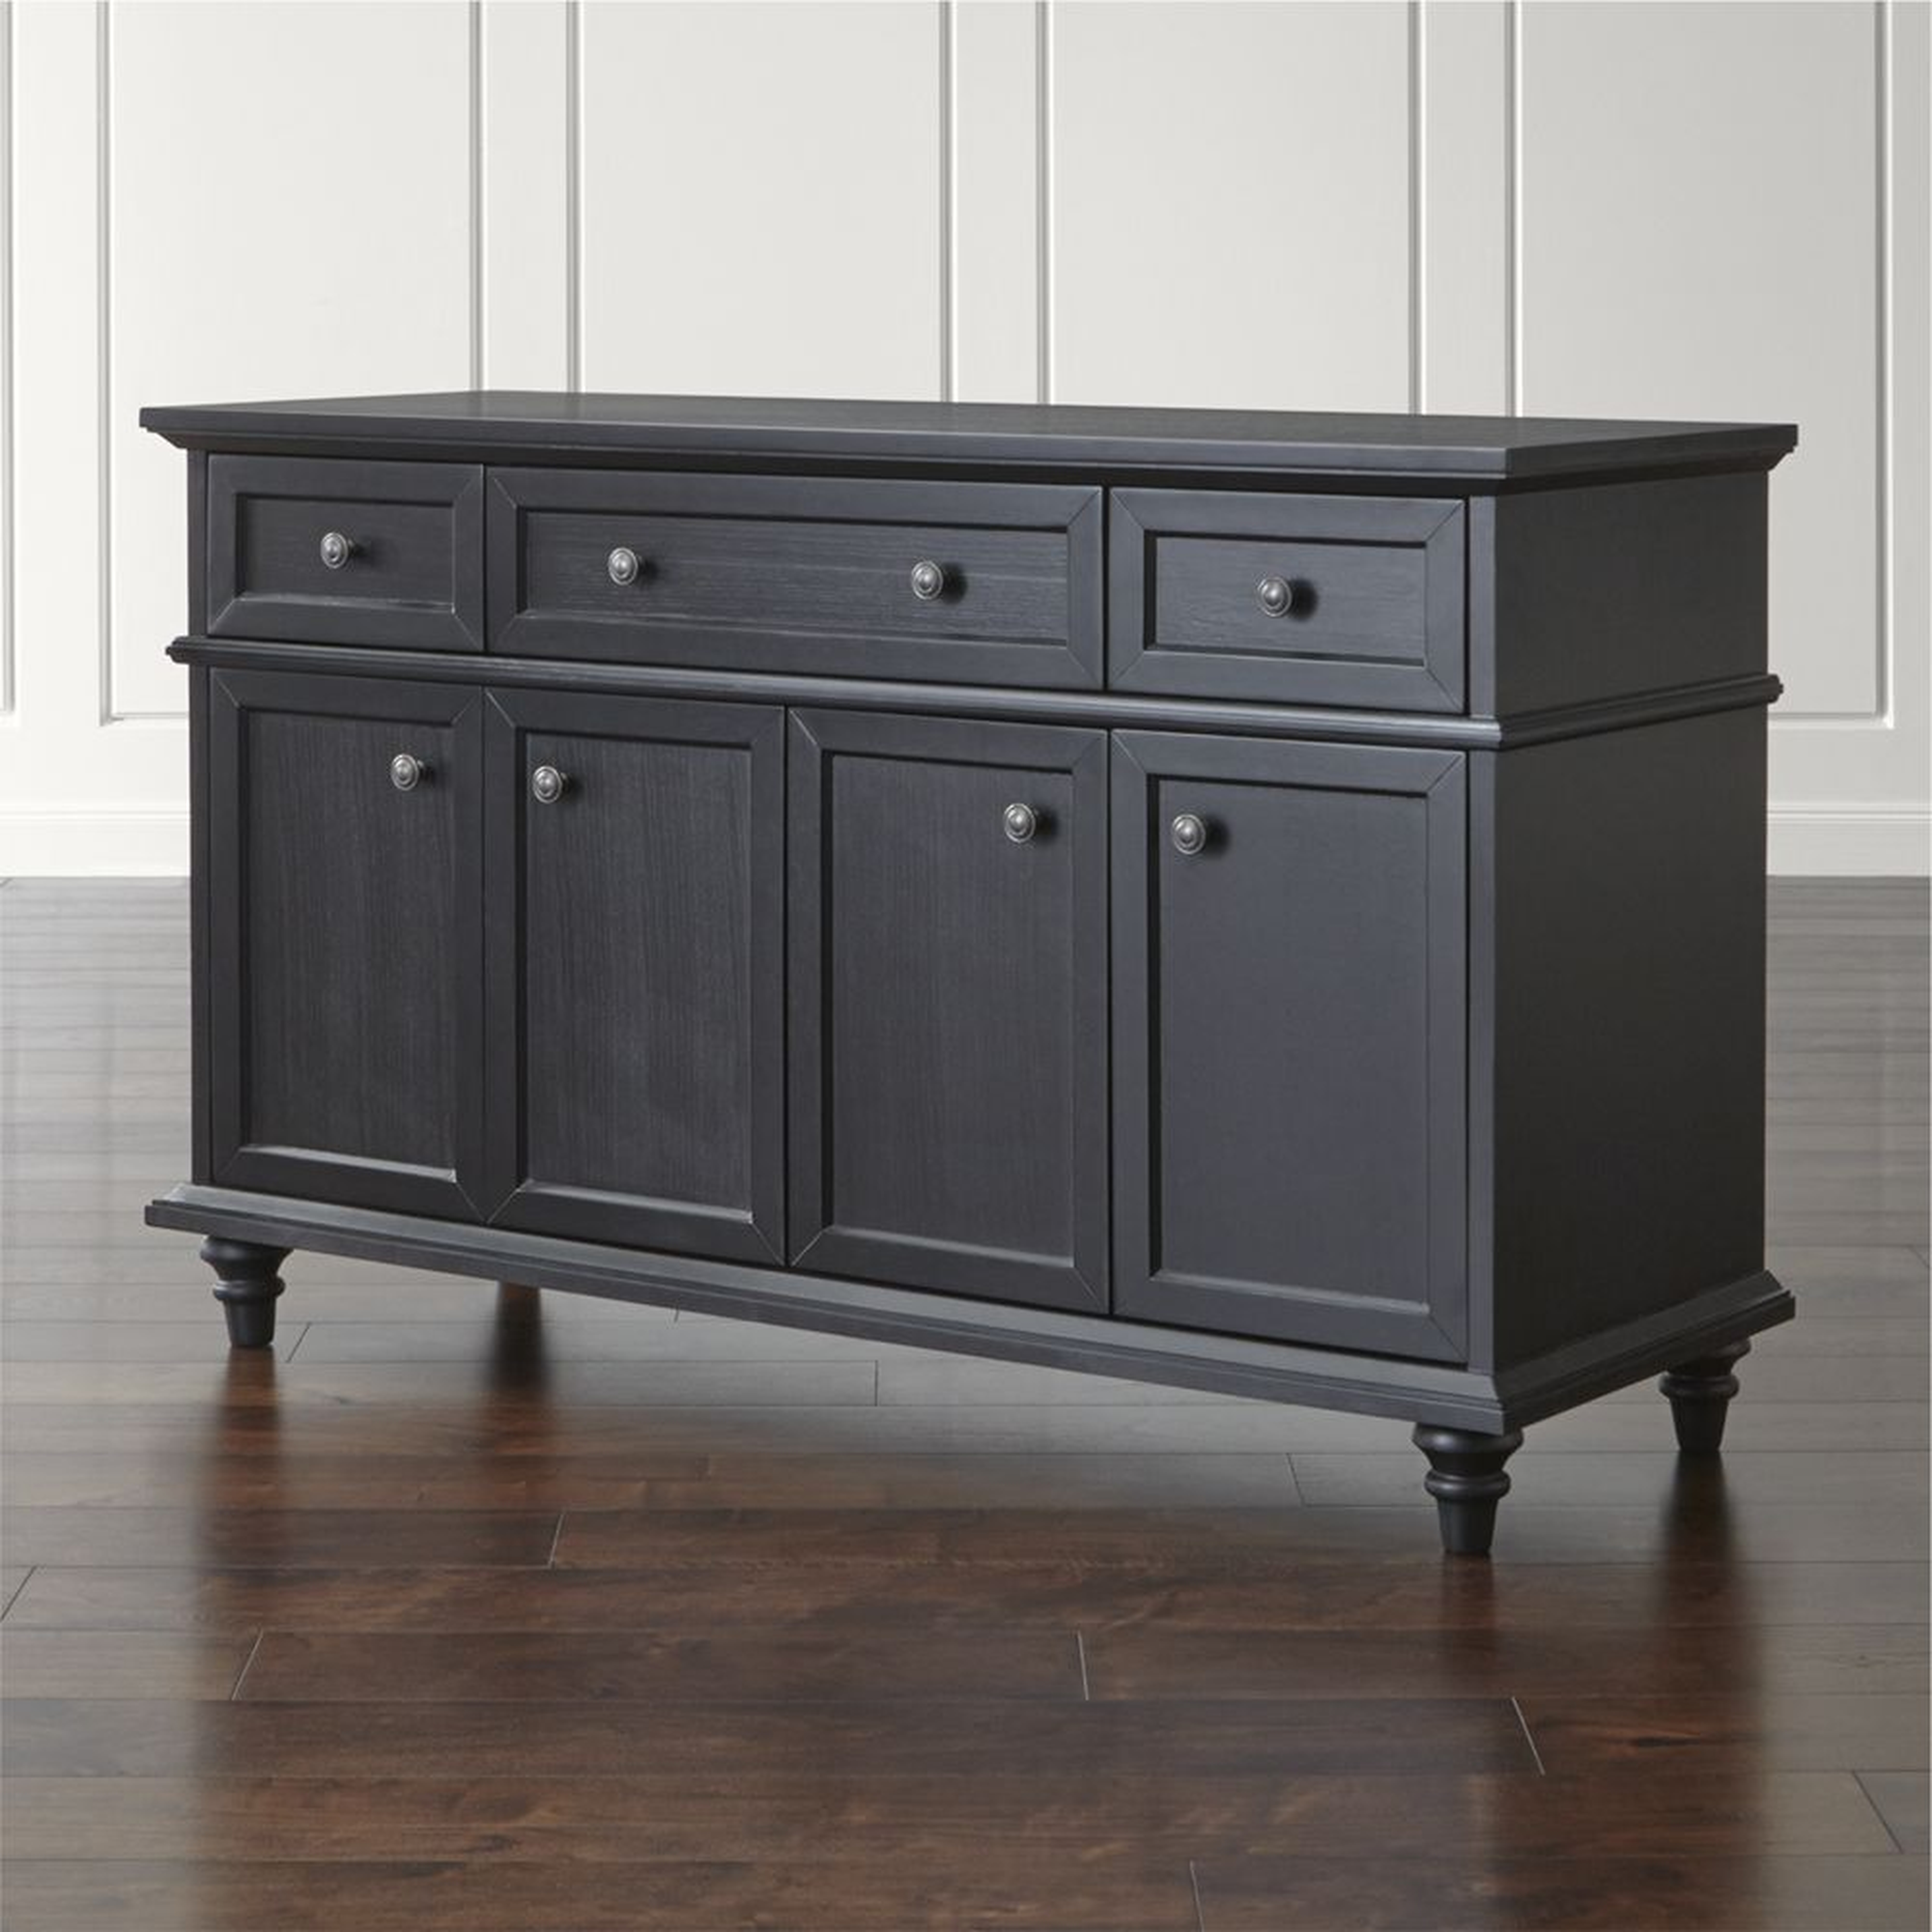 Avalon Black Sideboard - Crate and Barrel